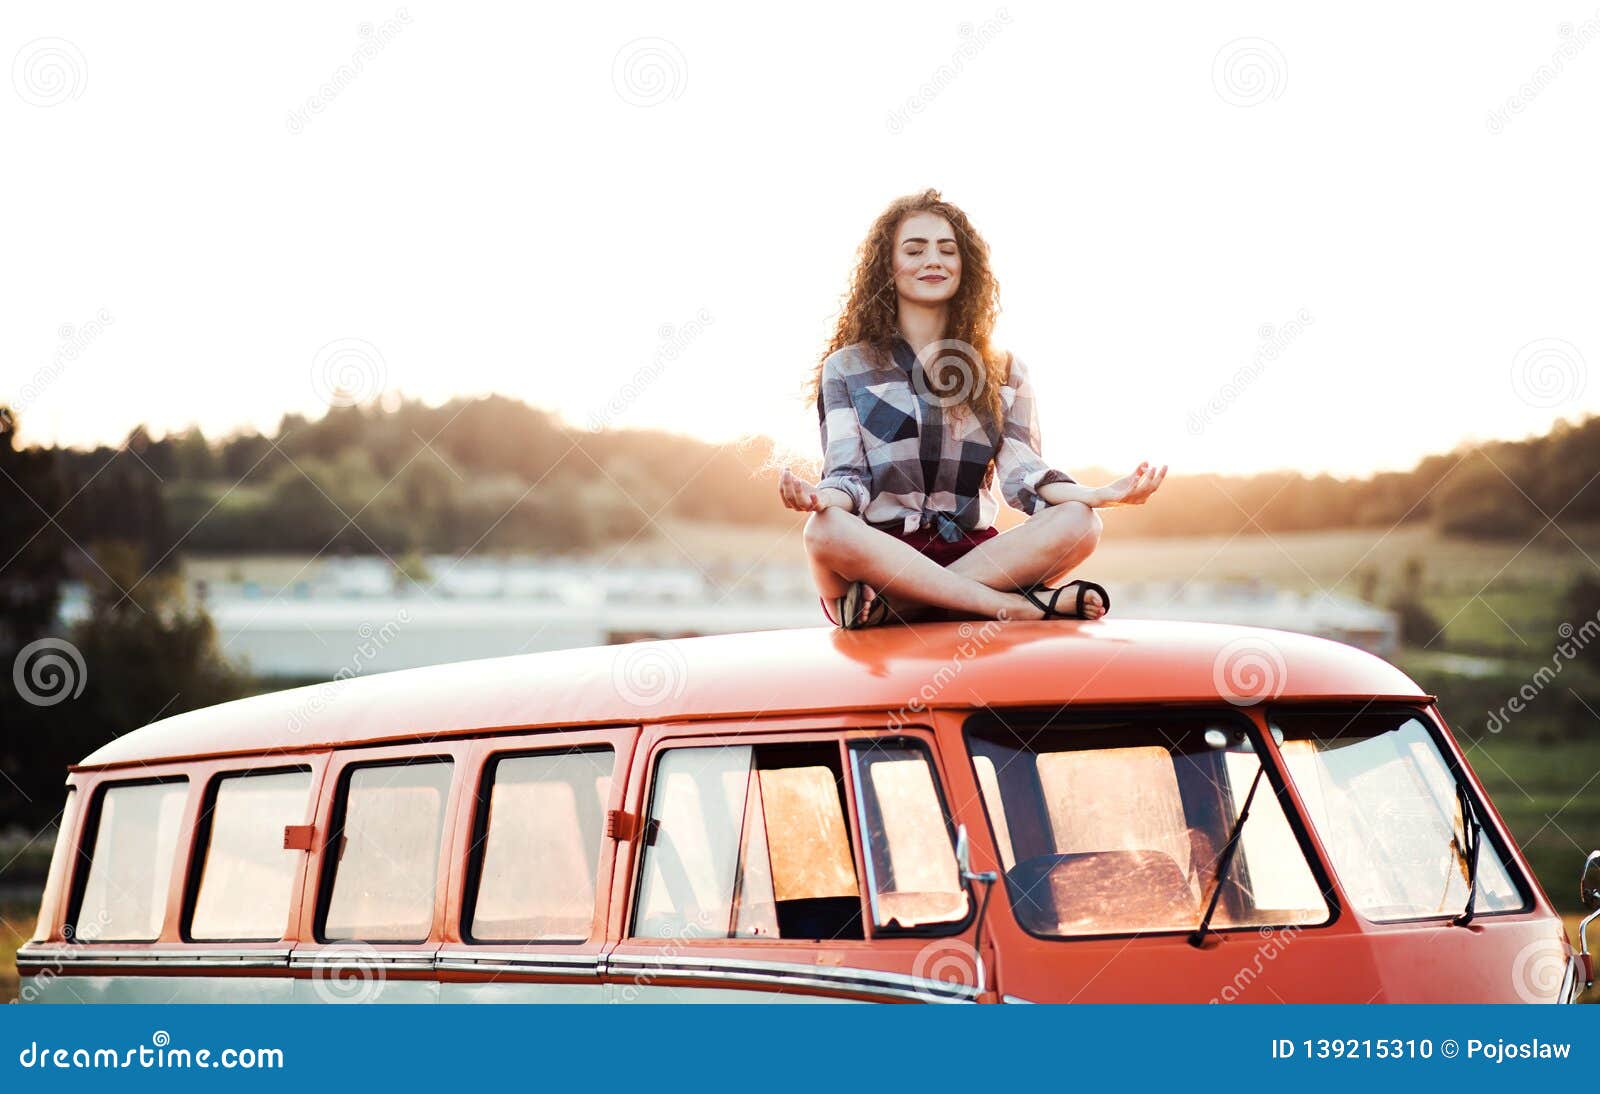 a young girl on a roadtrip through countryside, sitting on the roof of minivan doing yoga.